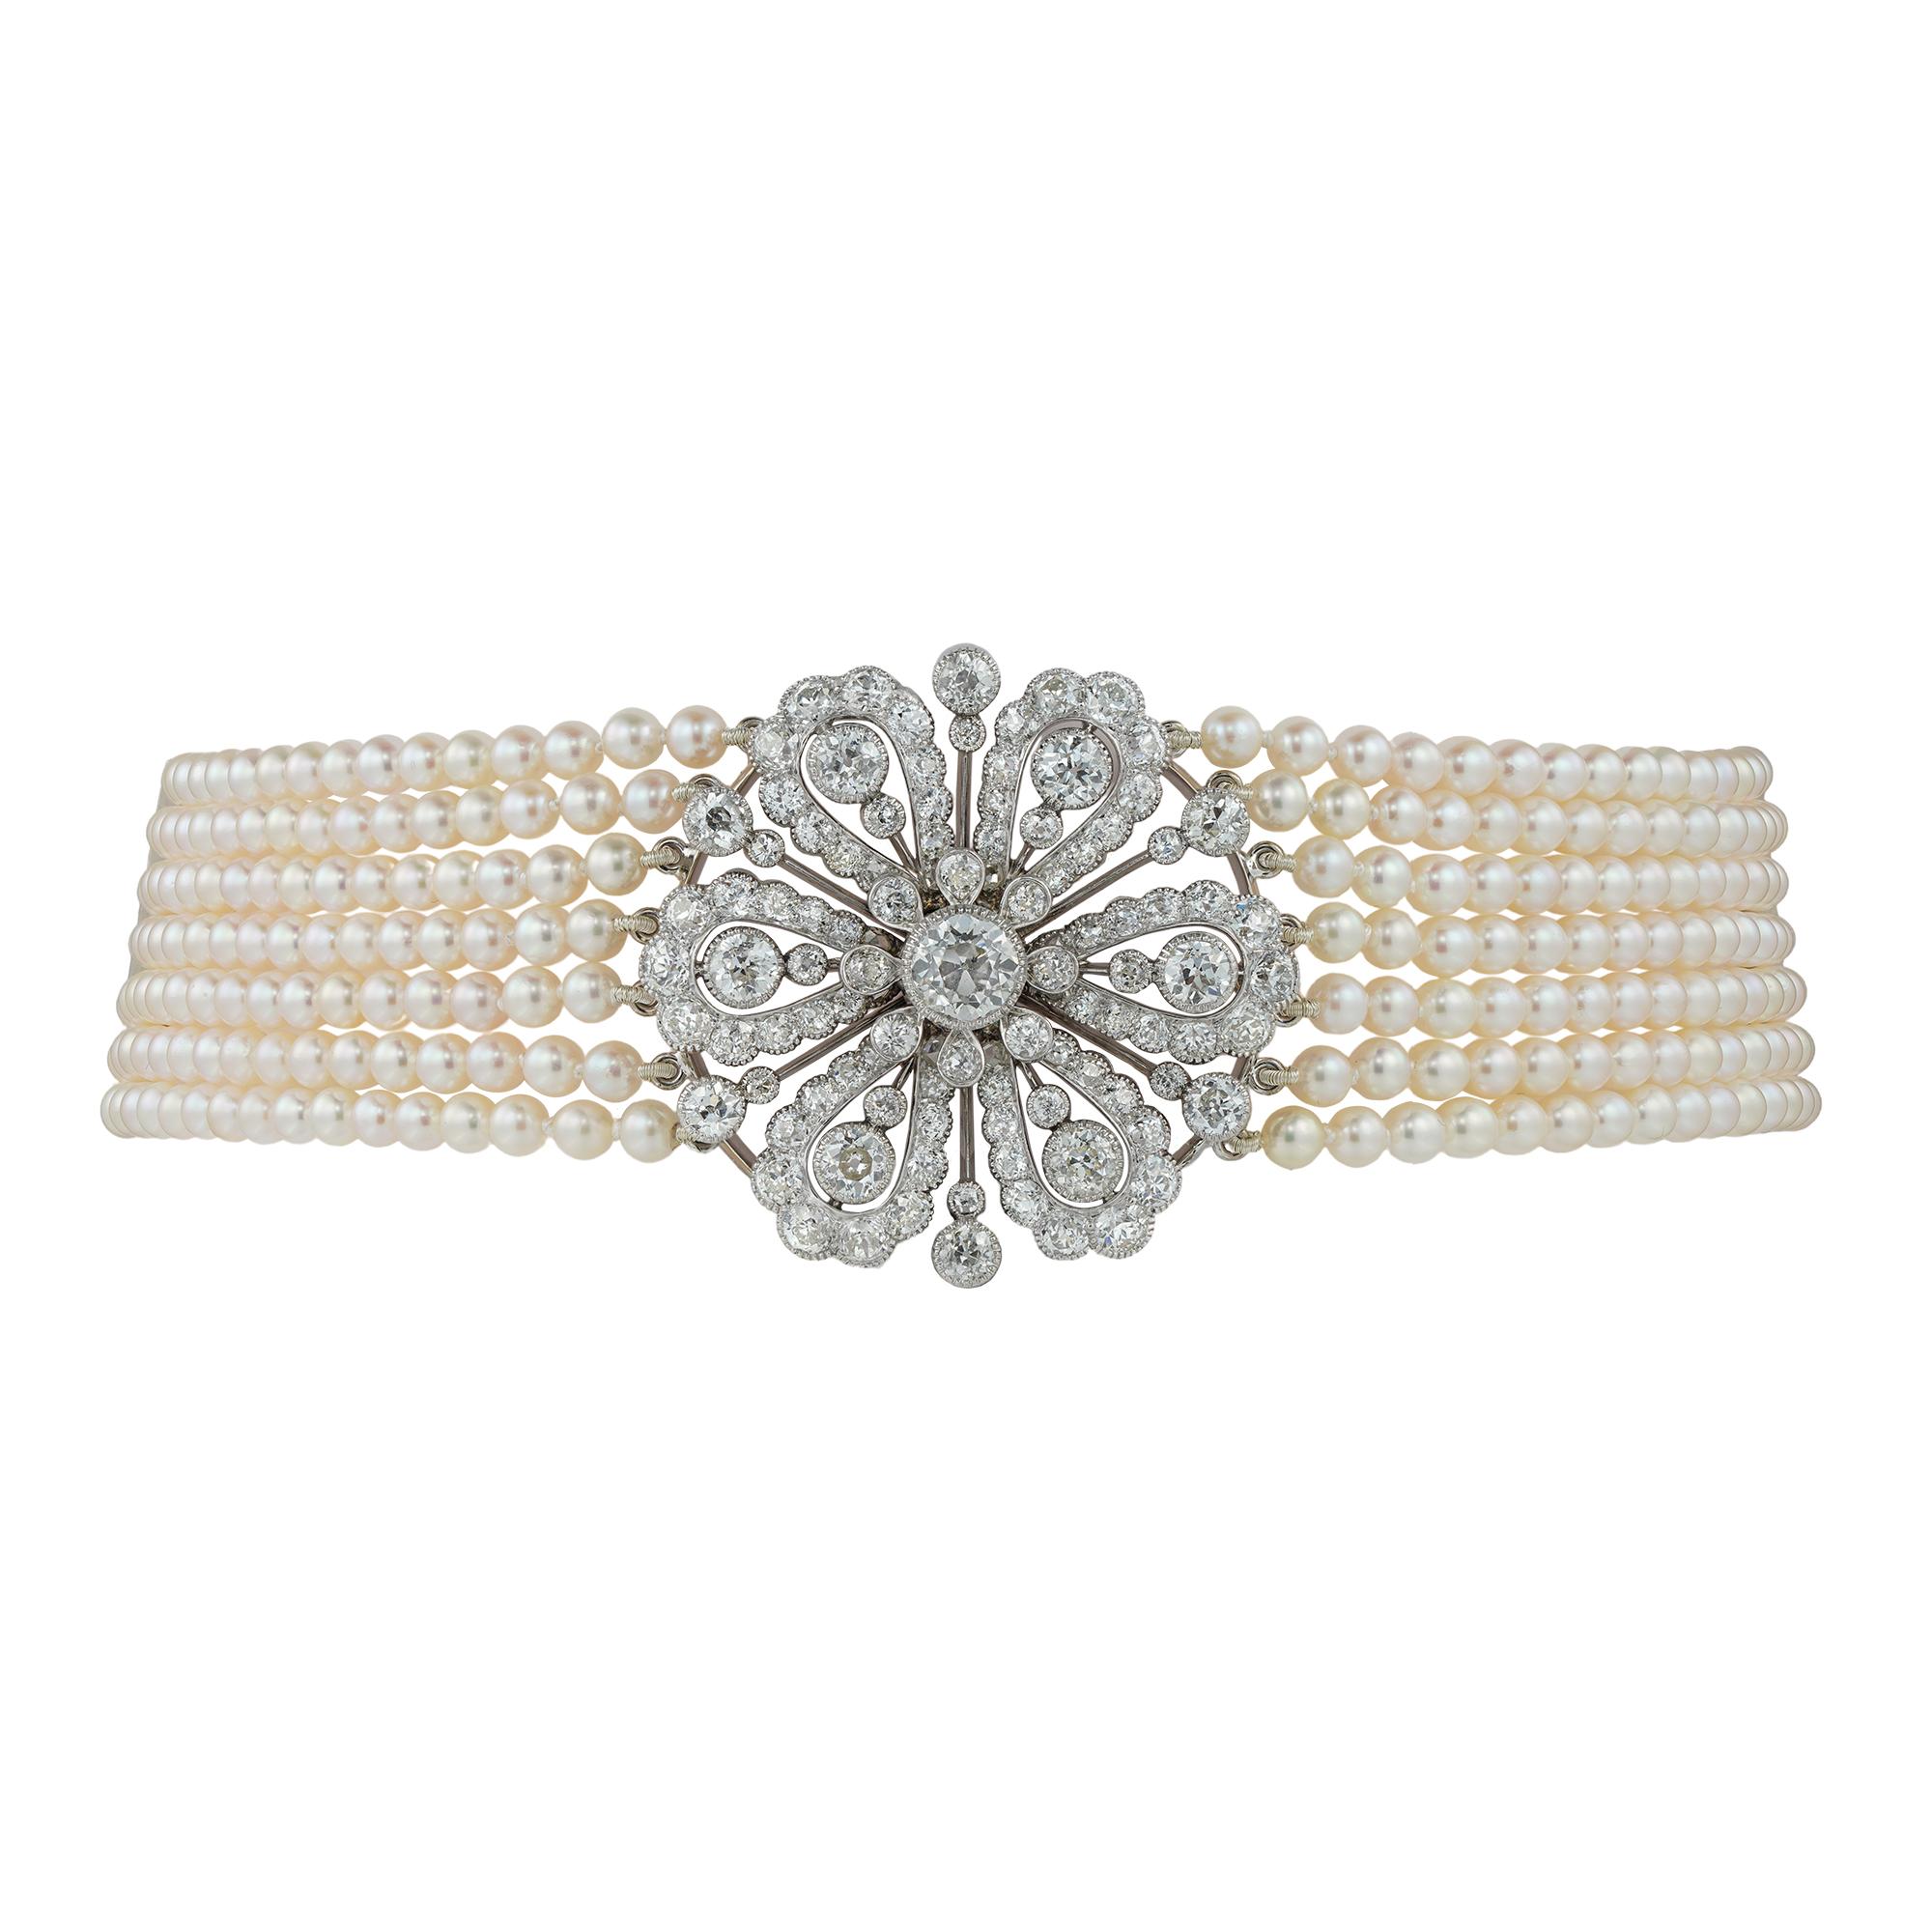 Edwardian Early 20th Century Diamond and Cultured Pearl Necklace